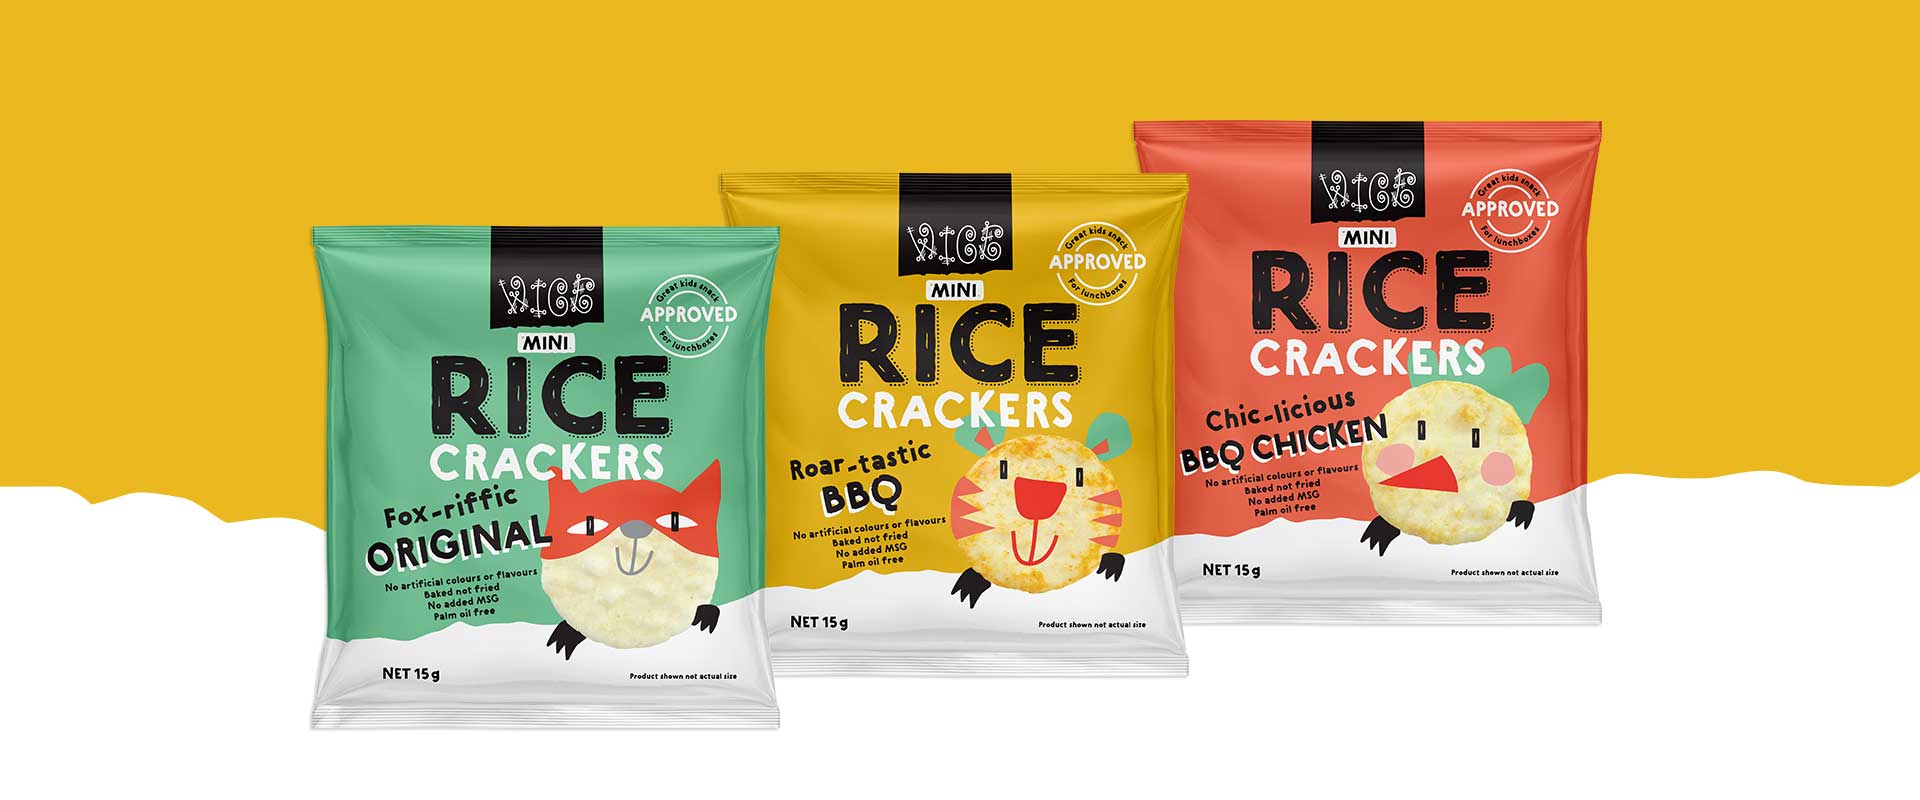 Snackfood Packaging Design Featuring Animated Characters